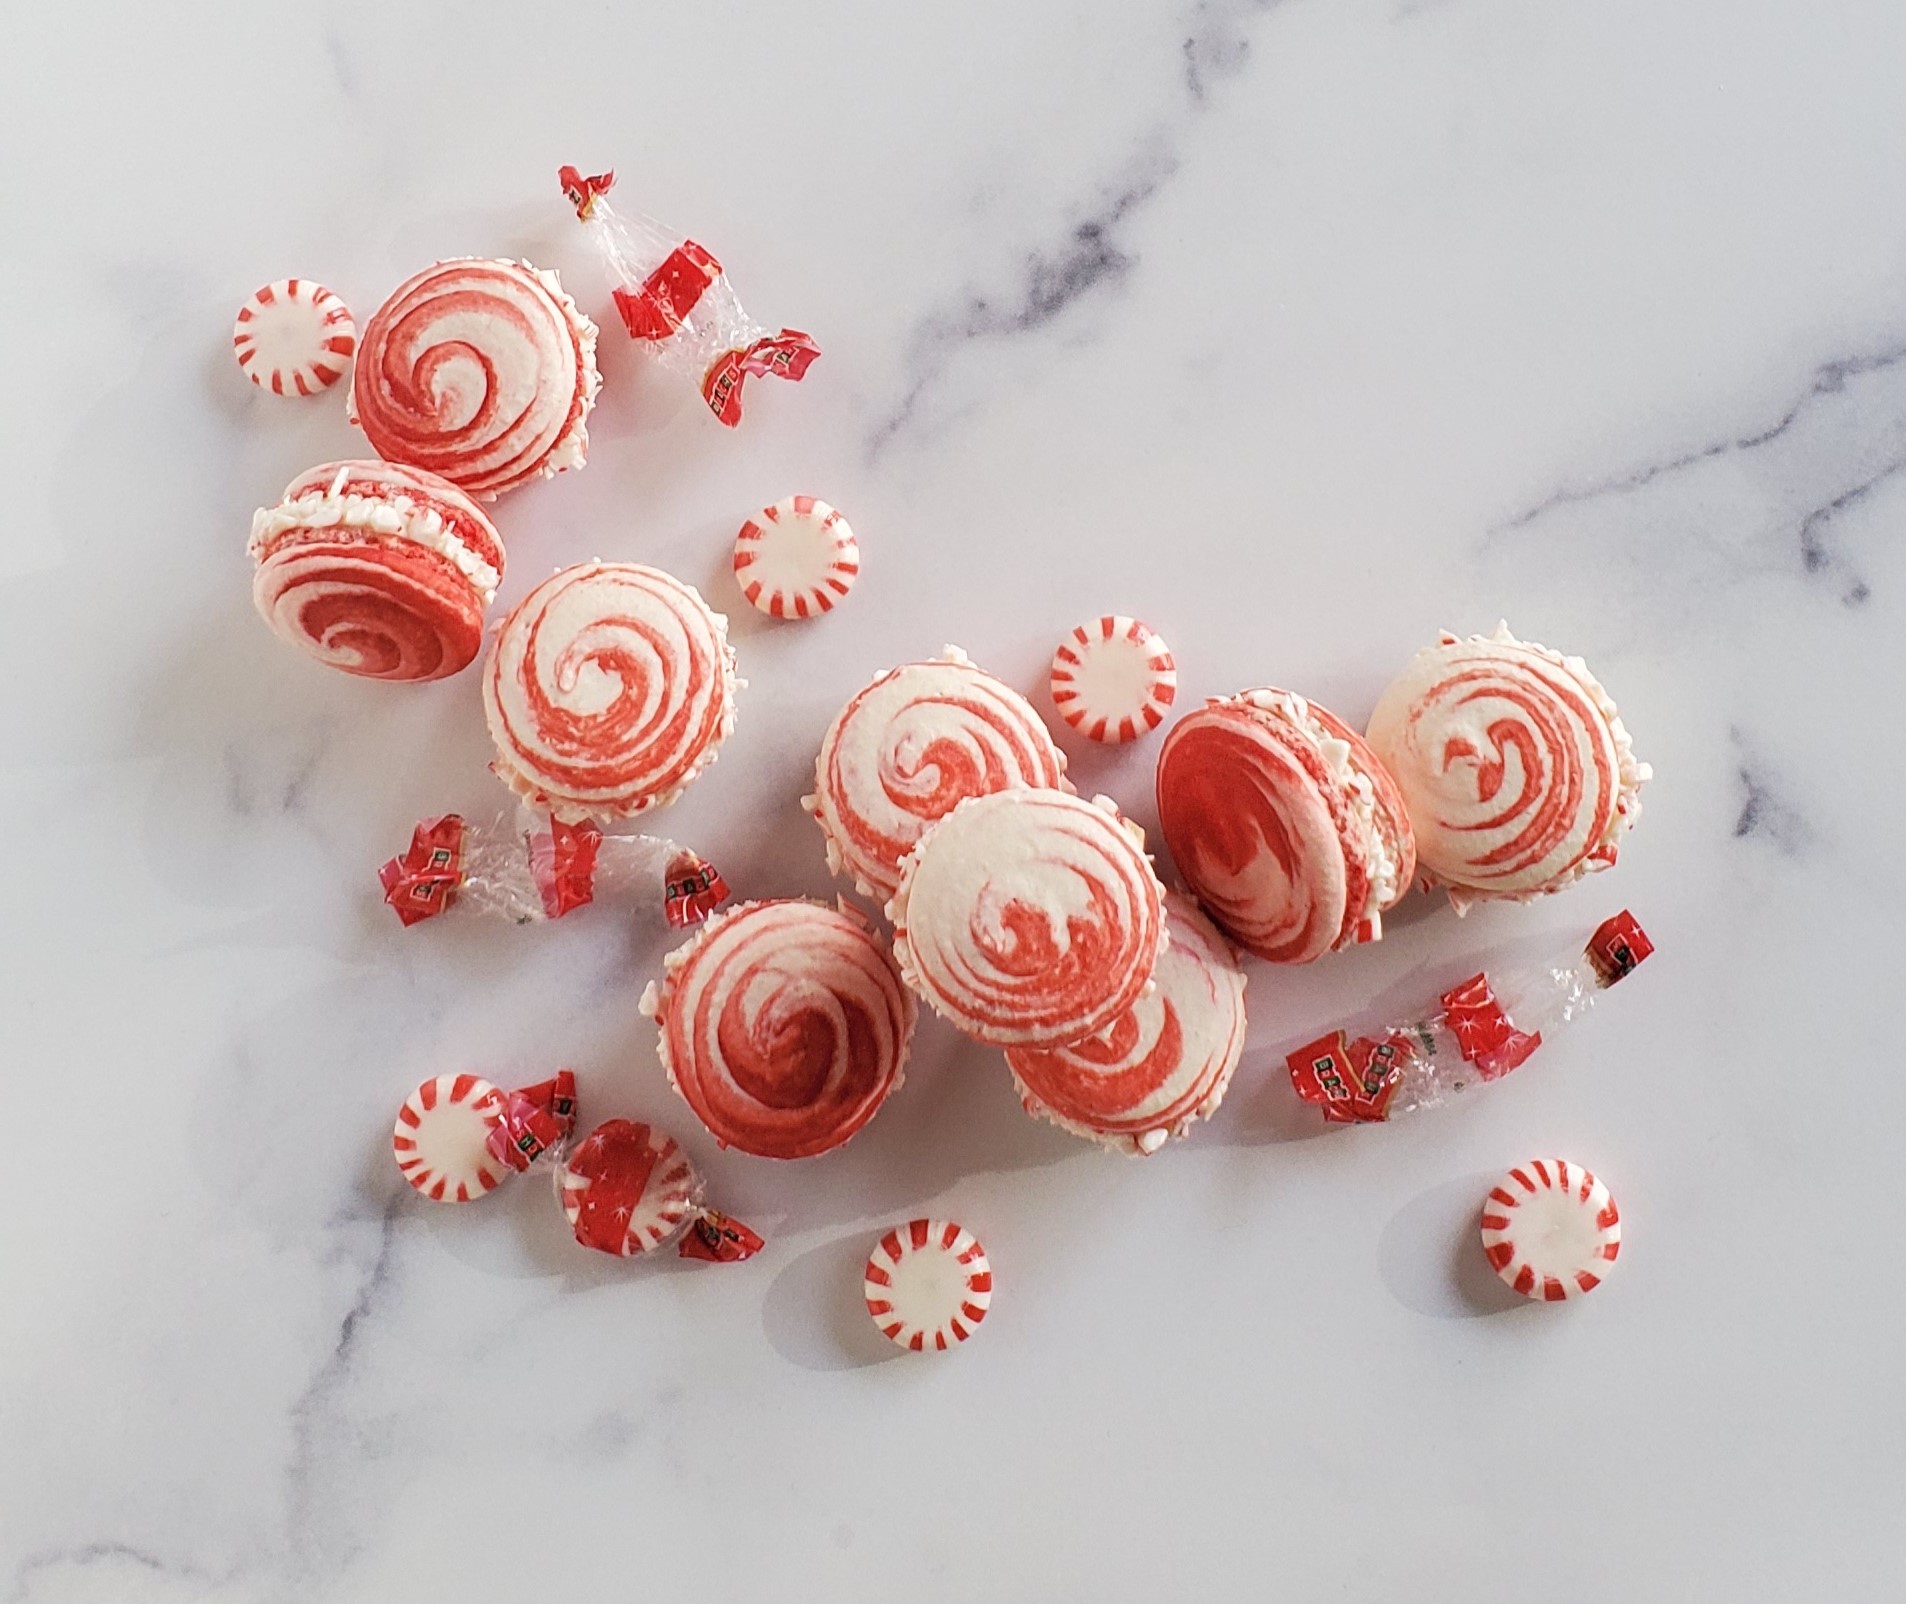 Peppermint swirl macarons in the shape of a "C" scattered with peppermint candies and their wrappers on a white marble surface.